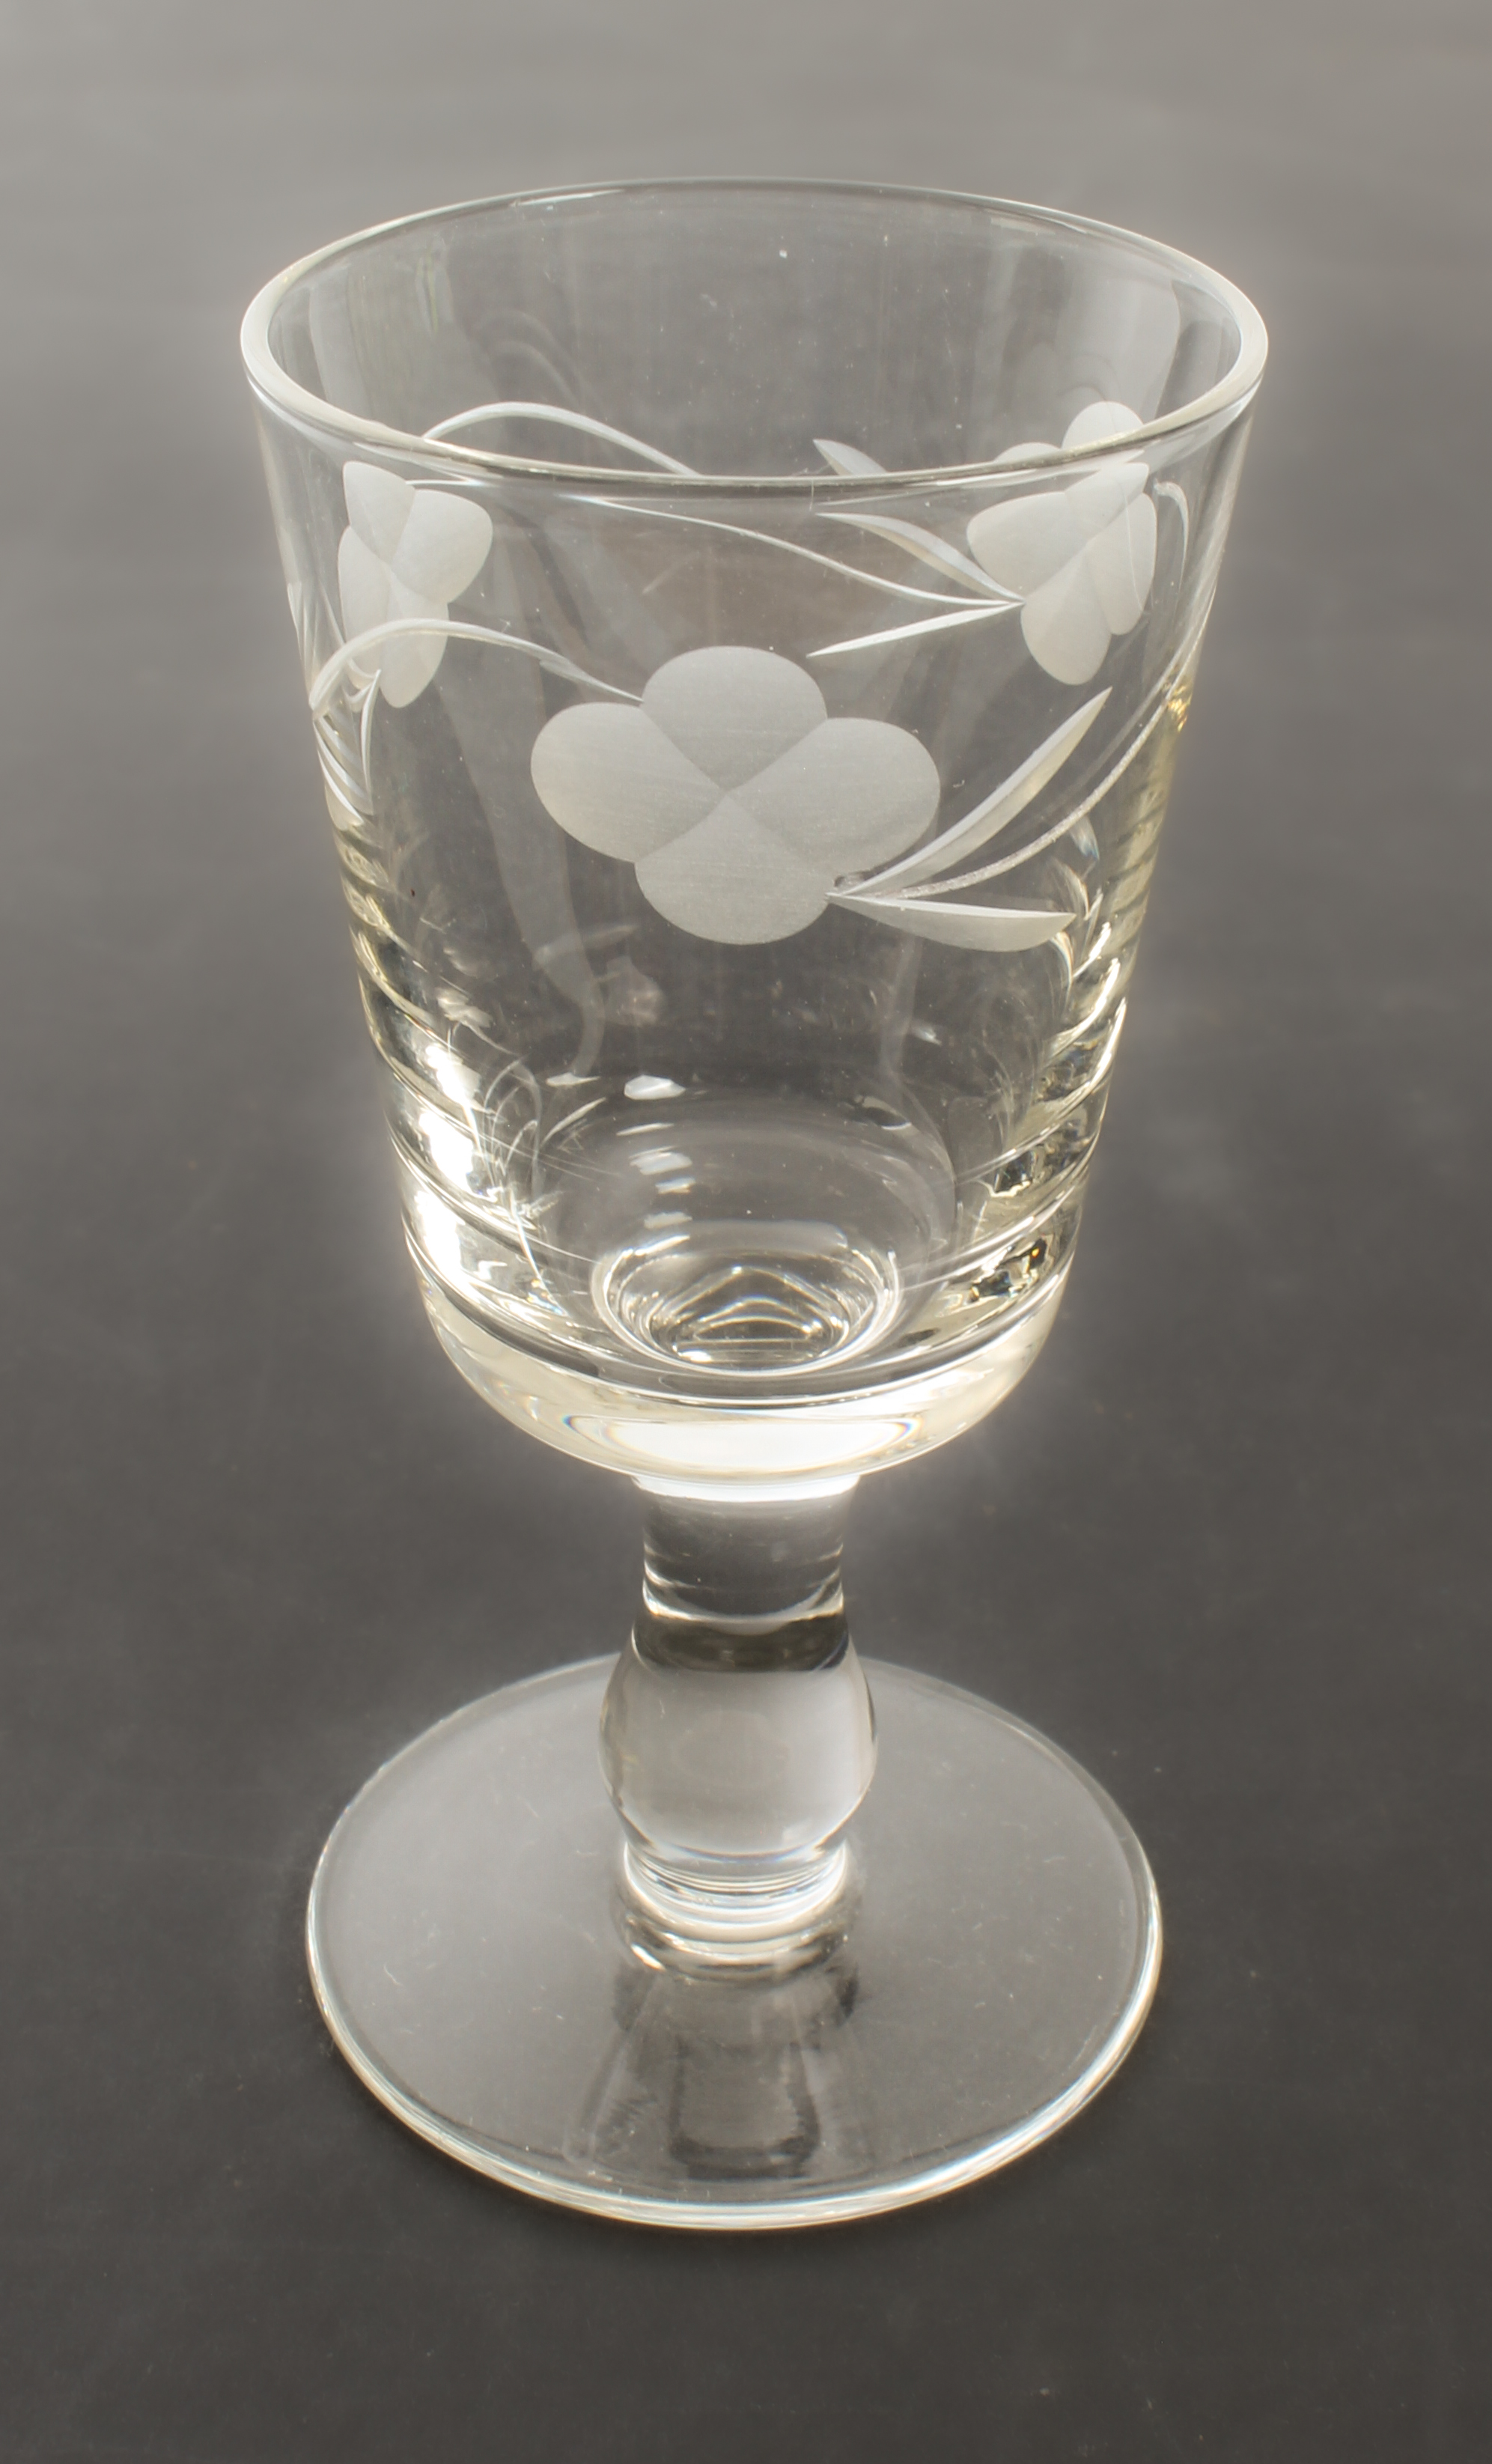 A set of twelve port glasses - 1950s-60s, the bucket bowls wheel-engraved with trailing flowers, - Image 2 of 2